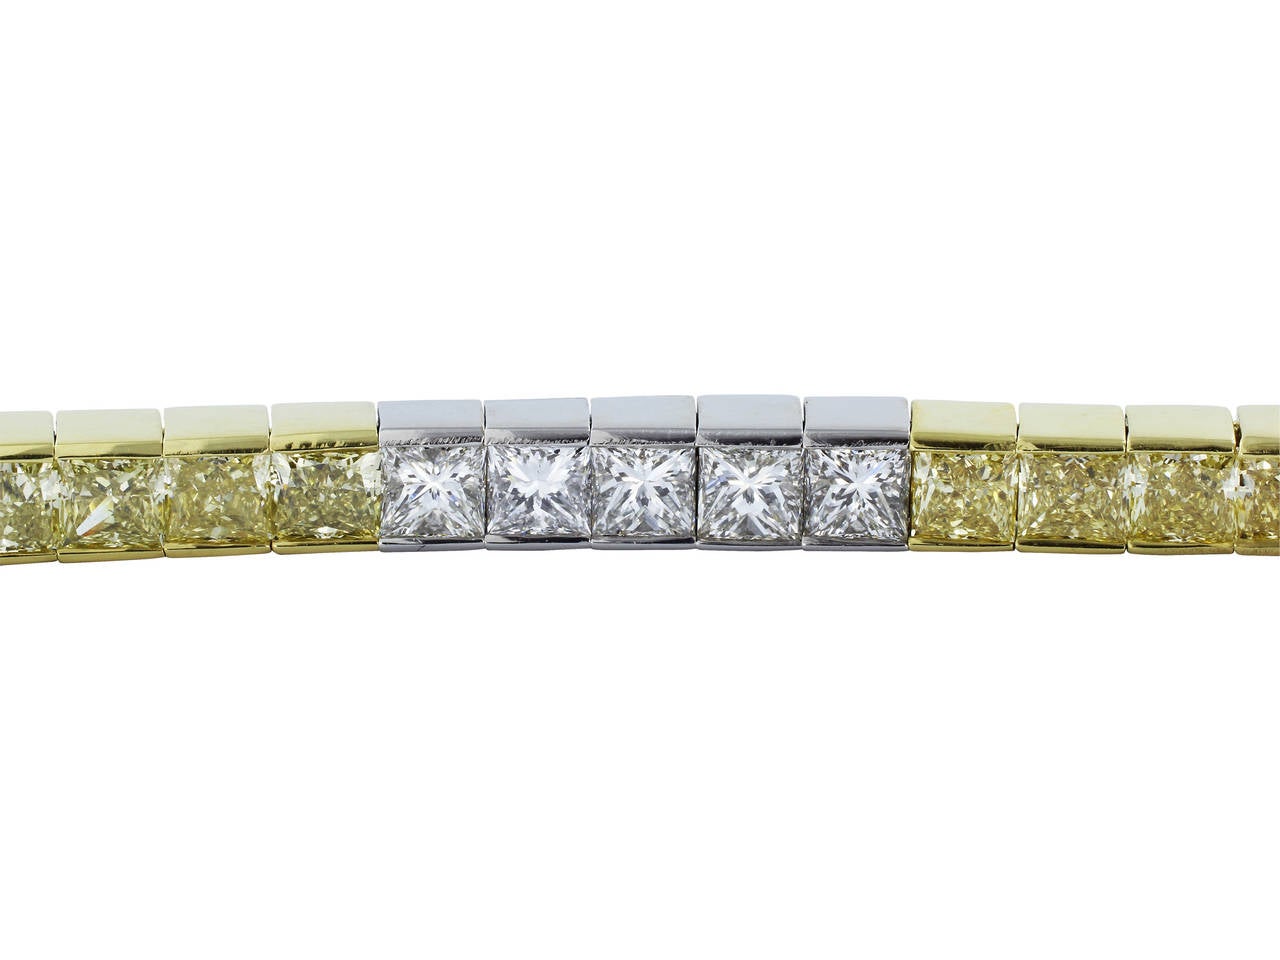 Platinum and 18 karat yellow gold channel set bracelet consisting of 25 radiant cut natural canary diamonds and 25 radiant cut colorless diamonds, total diamond weight for the bracelet is 14.73 carats.